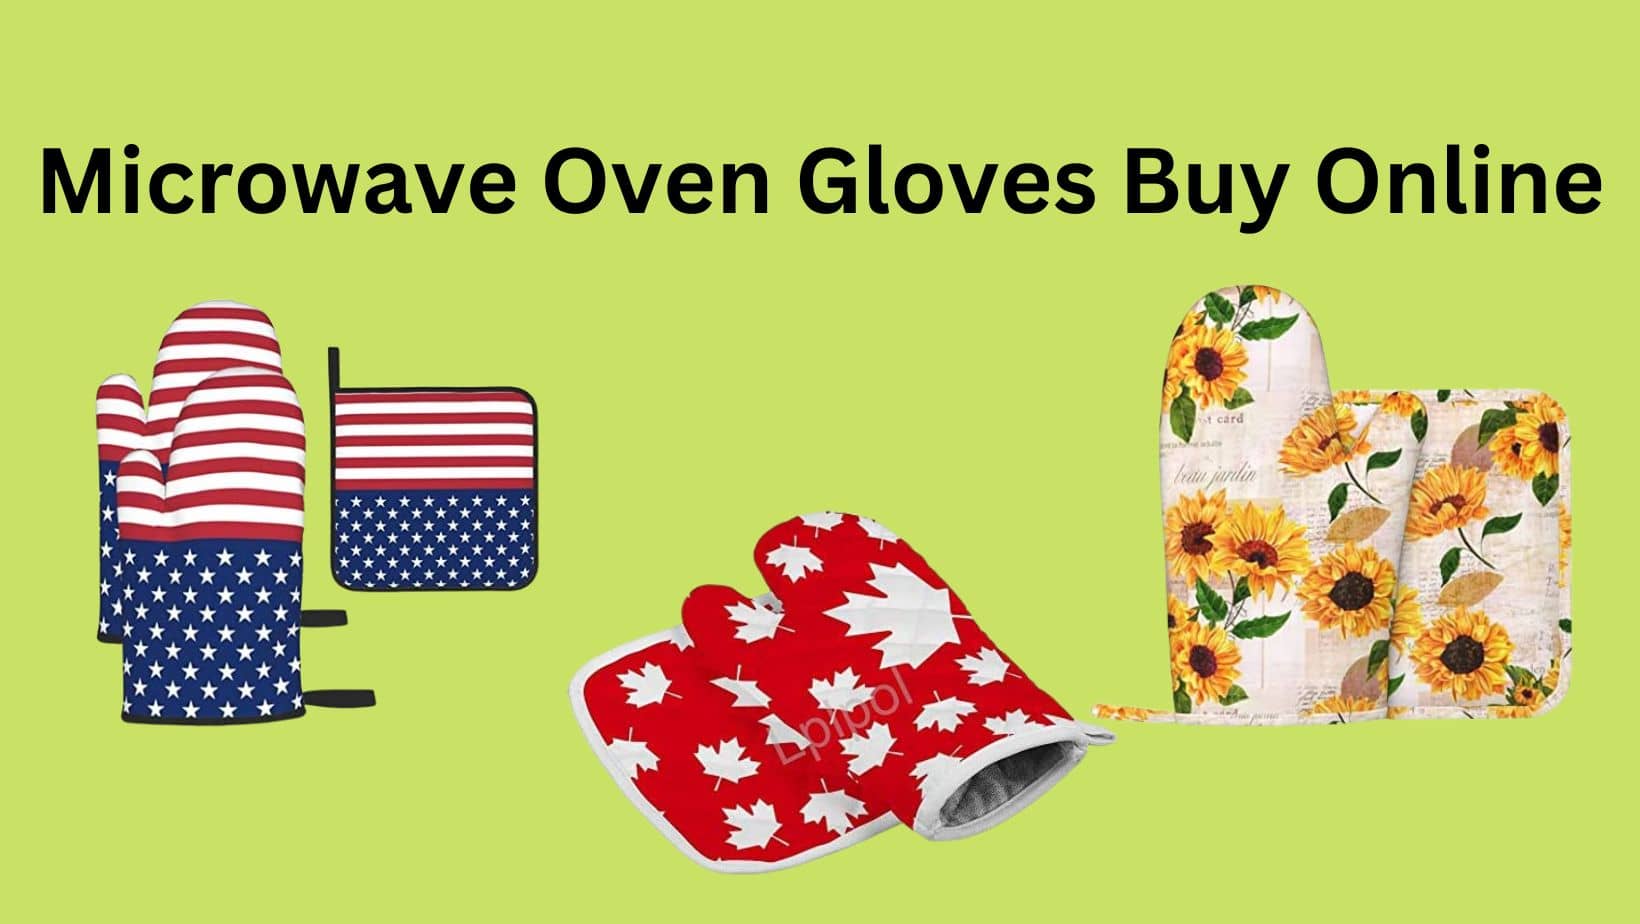 12 Best Microwave Oven Gloves to Buy Online